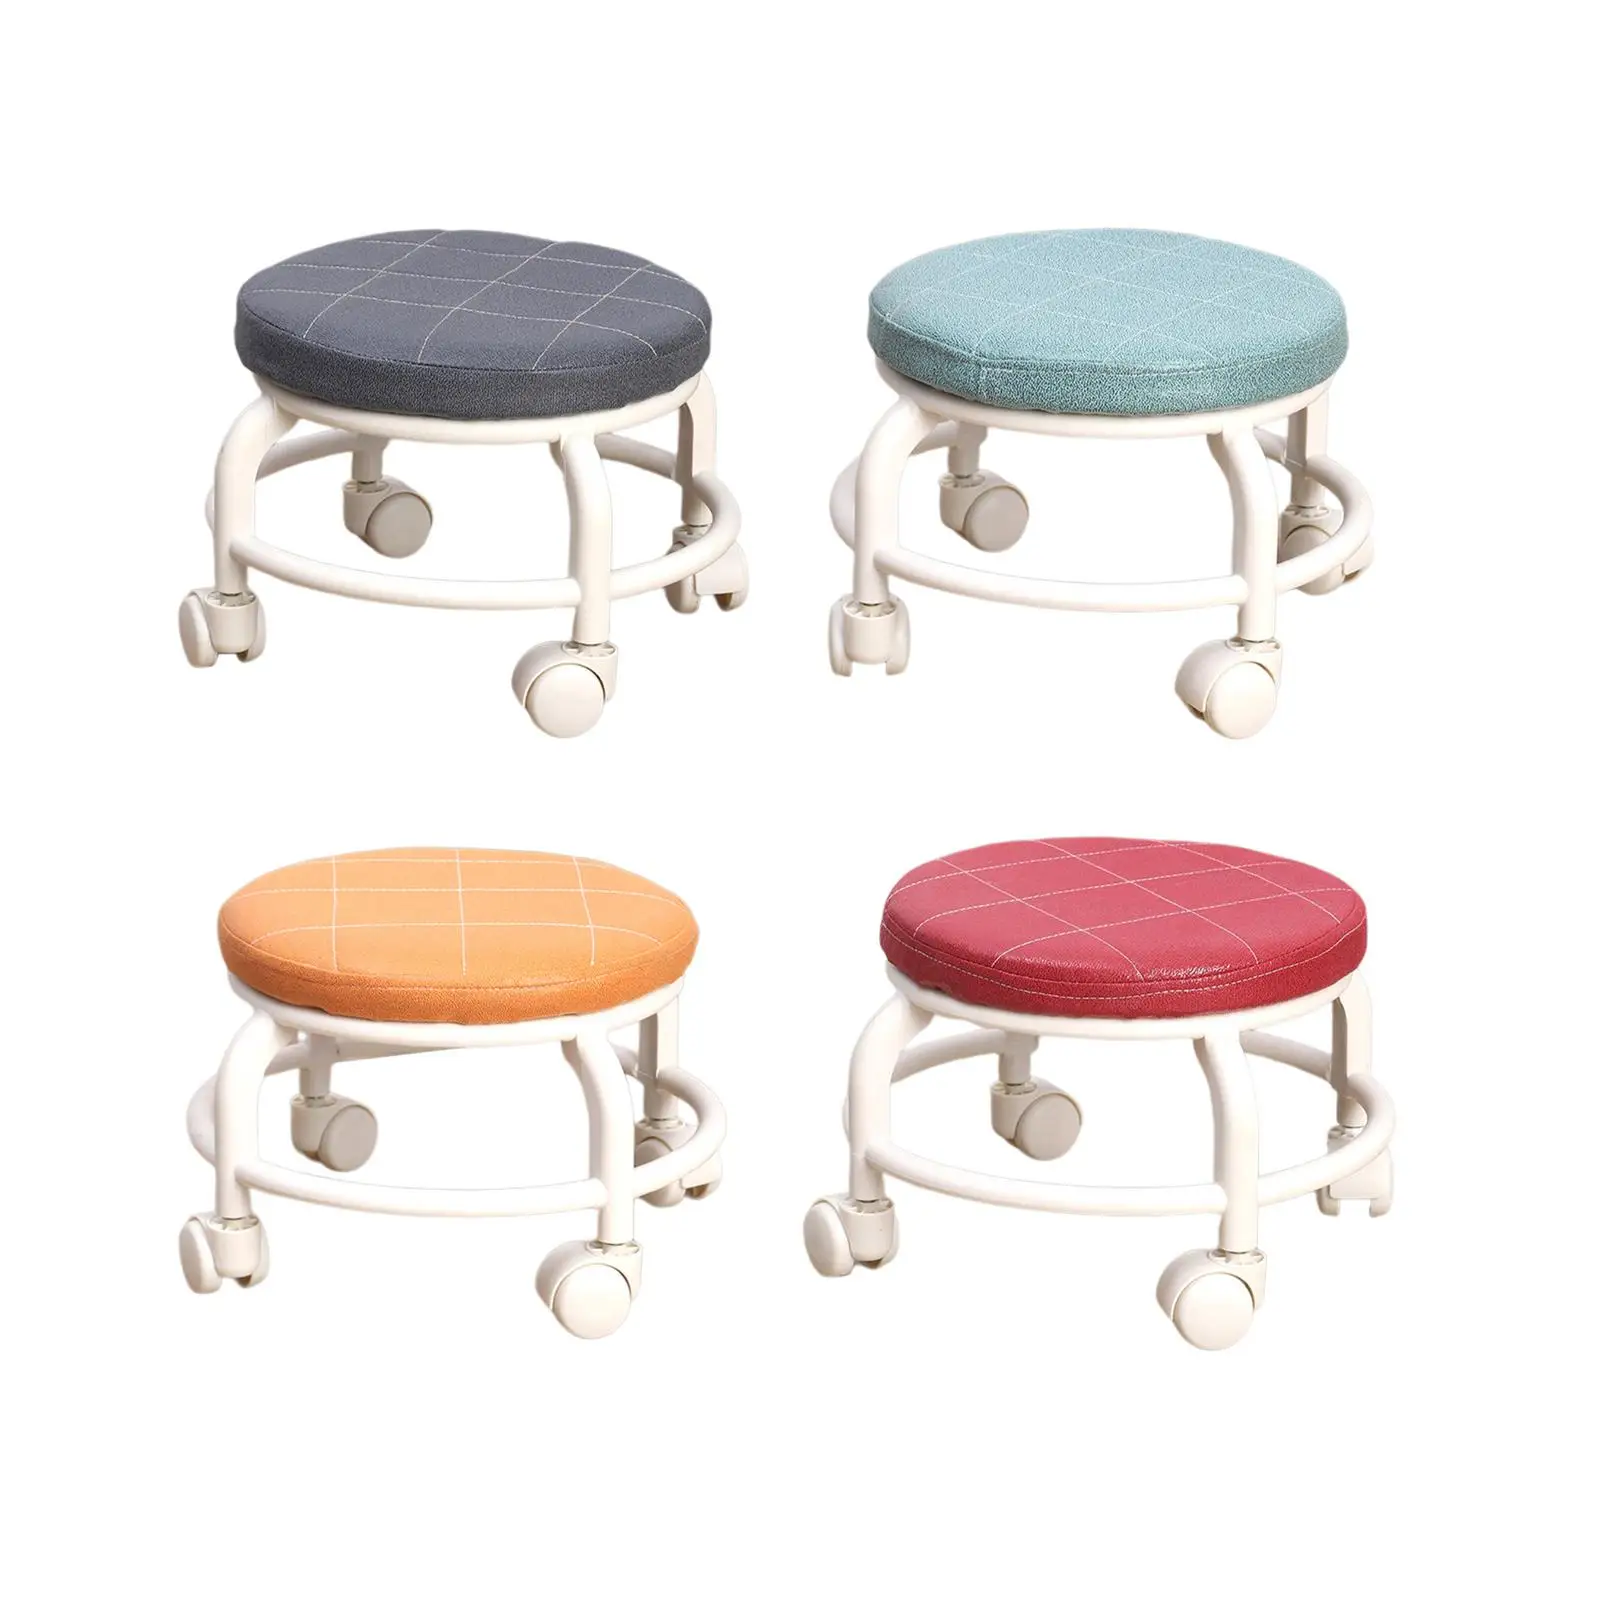 Low Rolling Stool Multifunctional Short Small Stool Chair Universal Swivel Casters Small Shoe Stool Seat for Shop Kids and Adult